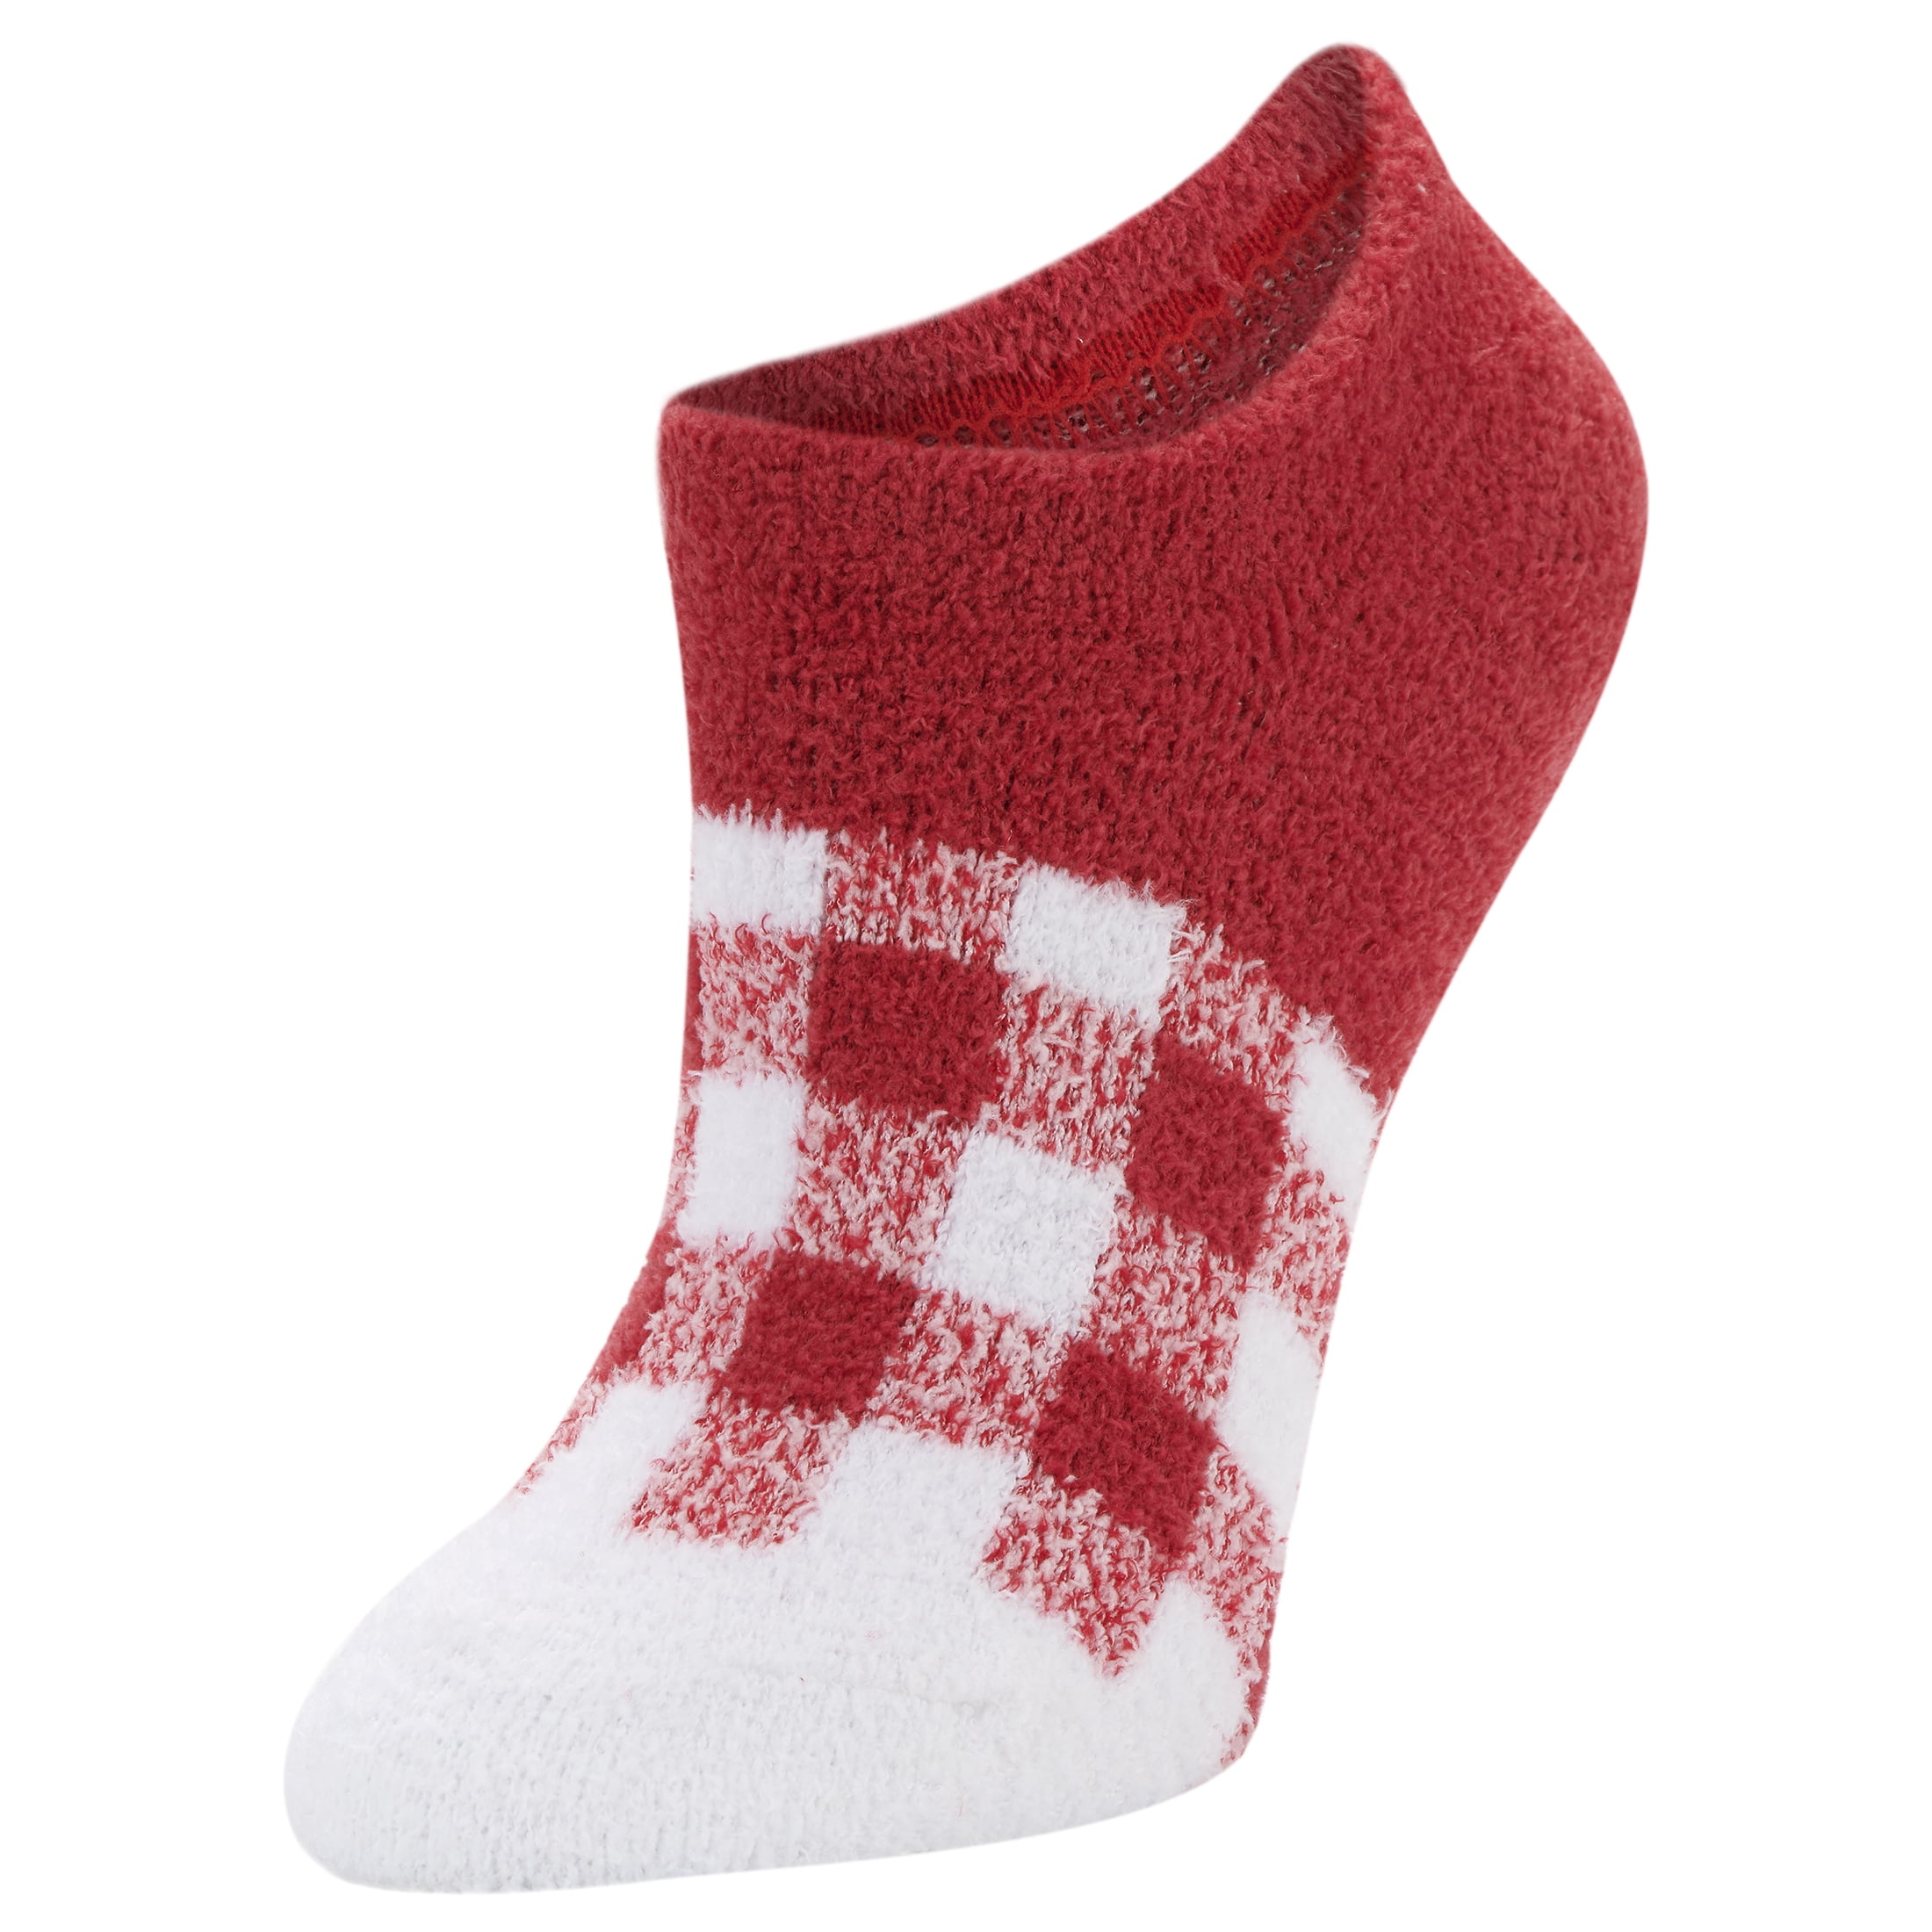 Airplus Aloe Infused Holiday Footie Socks,  Red Check, Women's 5-10